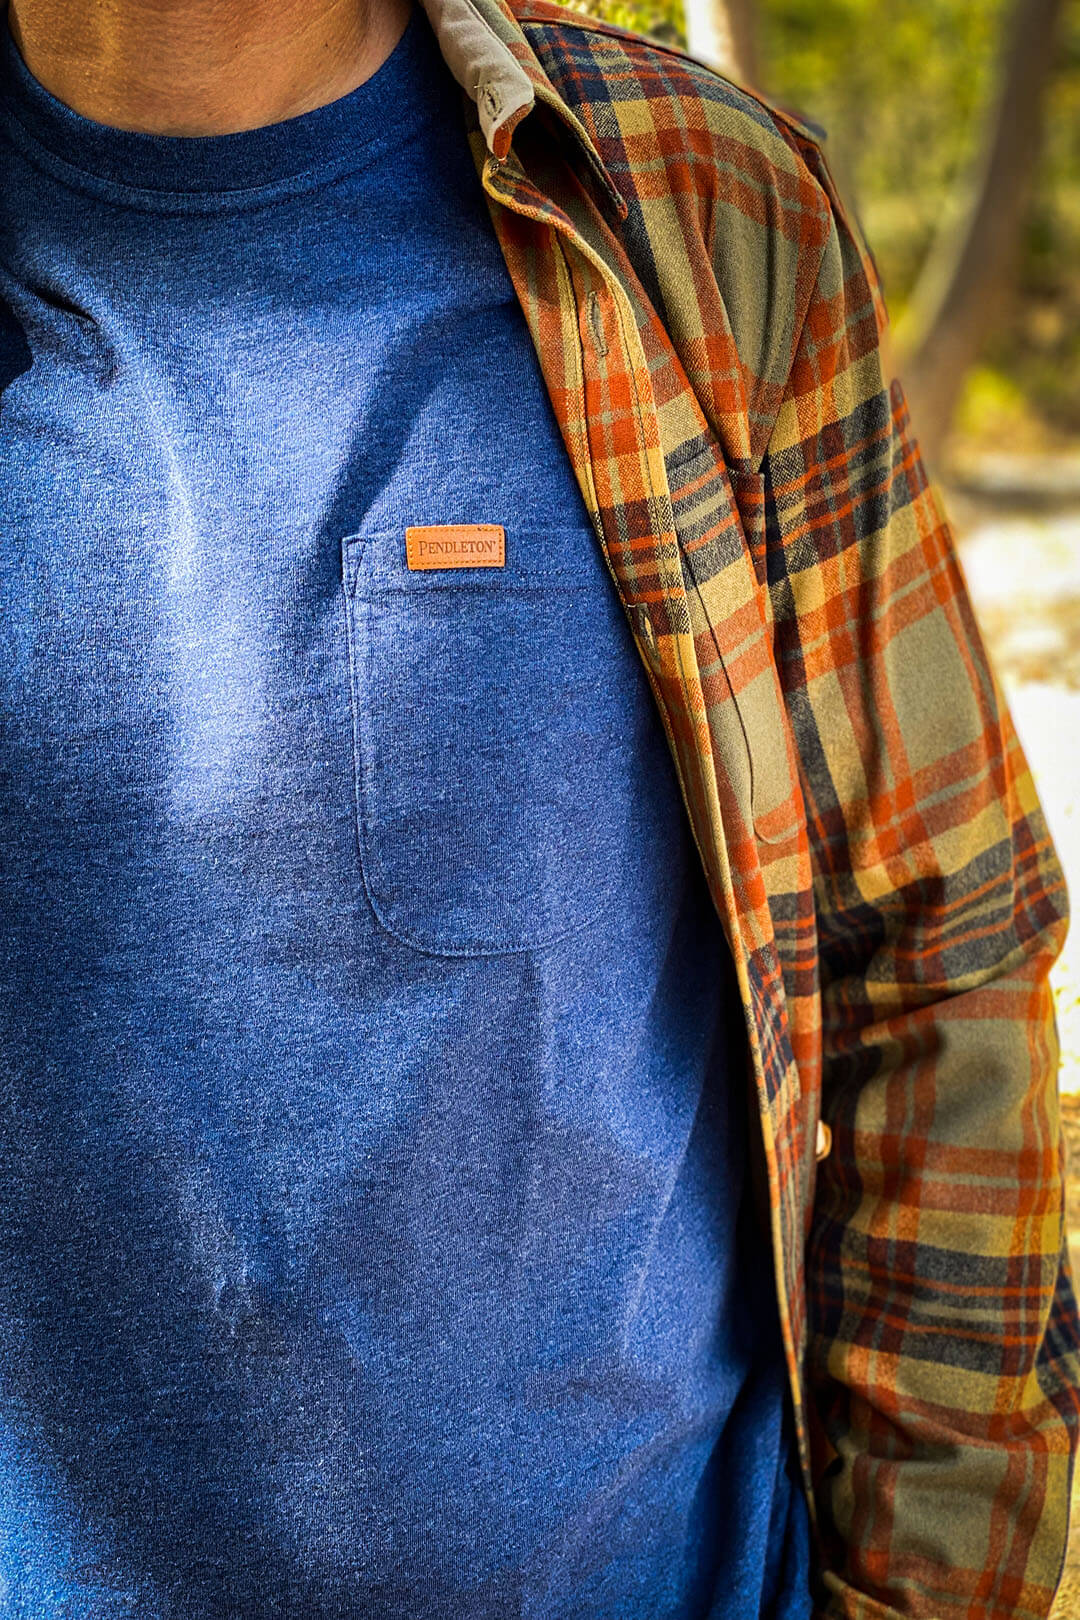 Man wearing Pendleton Deschutes Pocket Tee in a heather navy blue with outer layered button up Pendleton long sleeve yellow orange and blue shirt